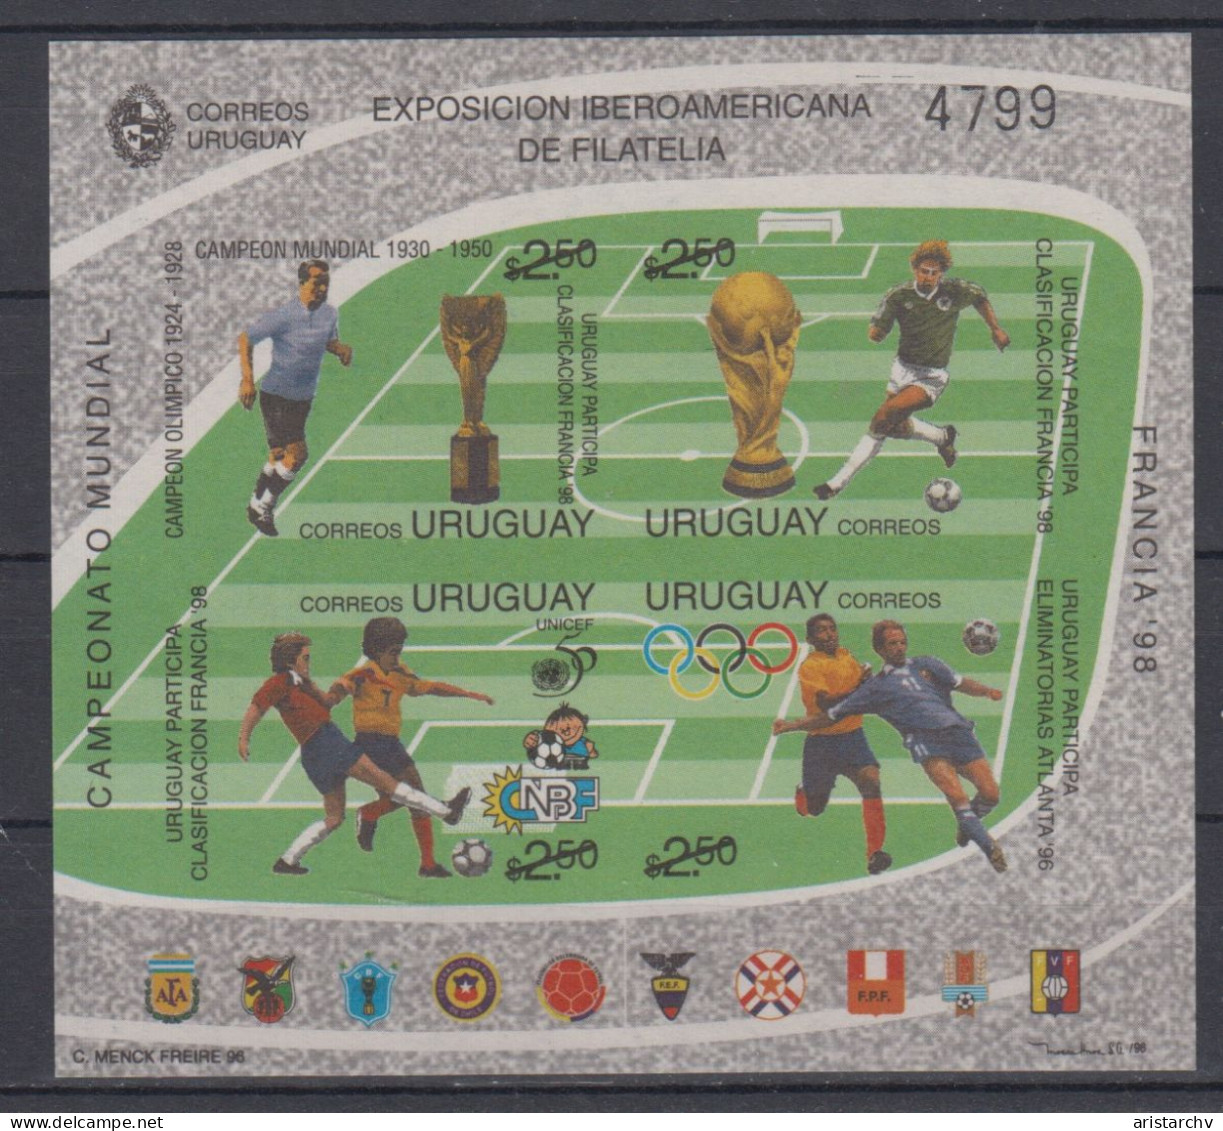 URUGUAY 1998 FOOTBALL WORLD CUP OLYMPIC GAMES STAMPS EXHIBITION IMPERFORATED AND PERFORATED S/SHEETS - 1998 – Frankreich